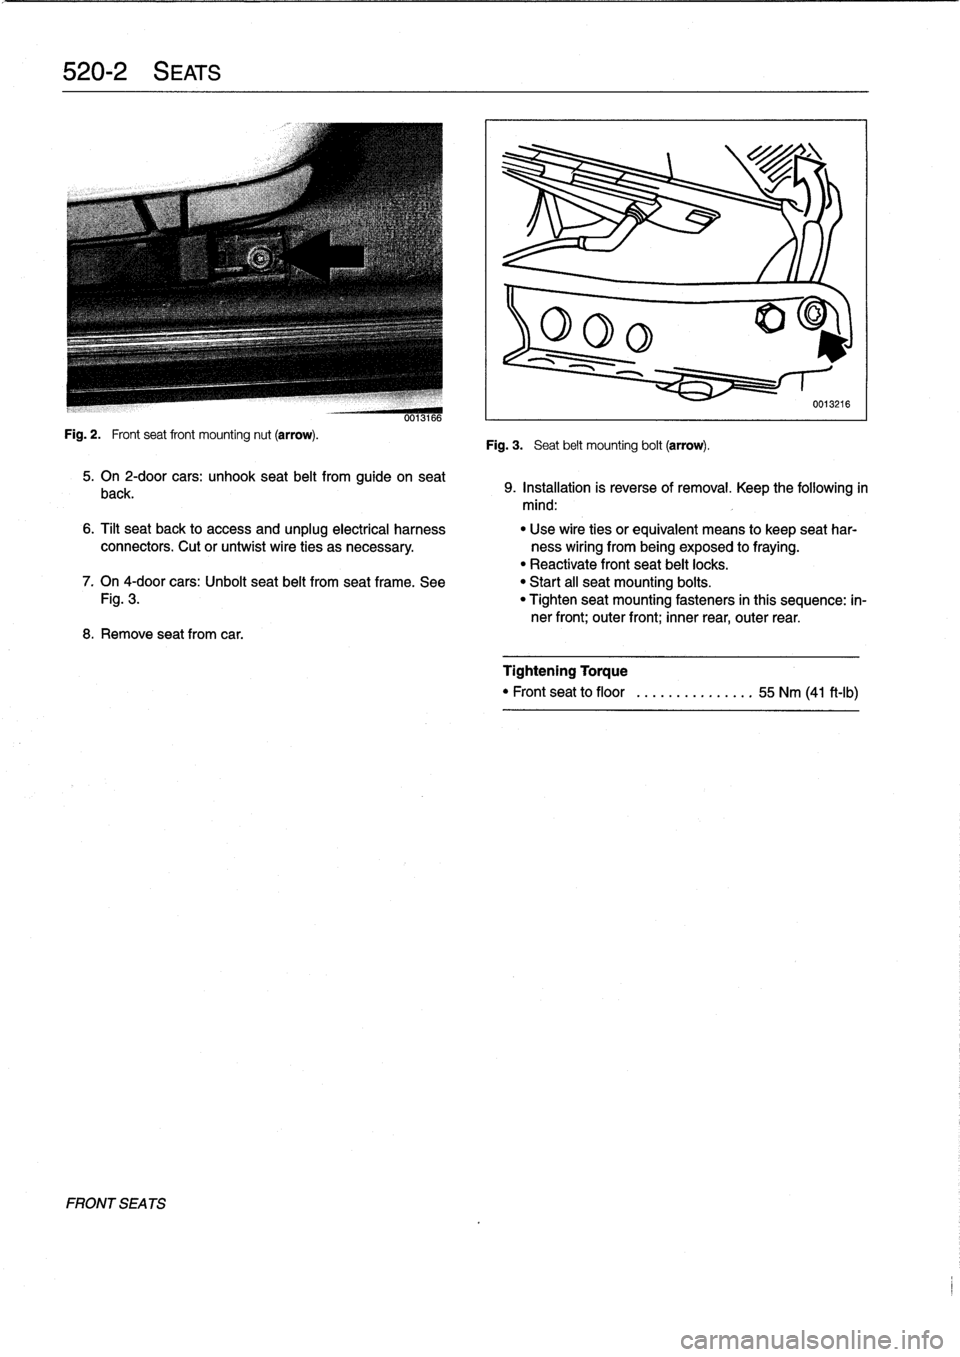 BMW 328i 1997 E36 Workshop Manual 520-2

	

S
EATS

Fig
.
2
.

	

Frontseat
front
mounting
nut
(arrow)
.

FRONT
SEA
TS

0013166

5
.
On
2-door
cars
:
unhook
seat
belt
from
guide
on
seat

back
.

8
.
Remove
seatfrom
car
.

Fig
.
3
.

	